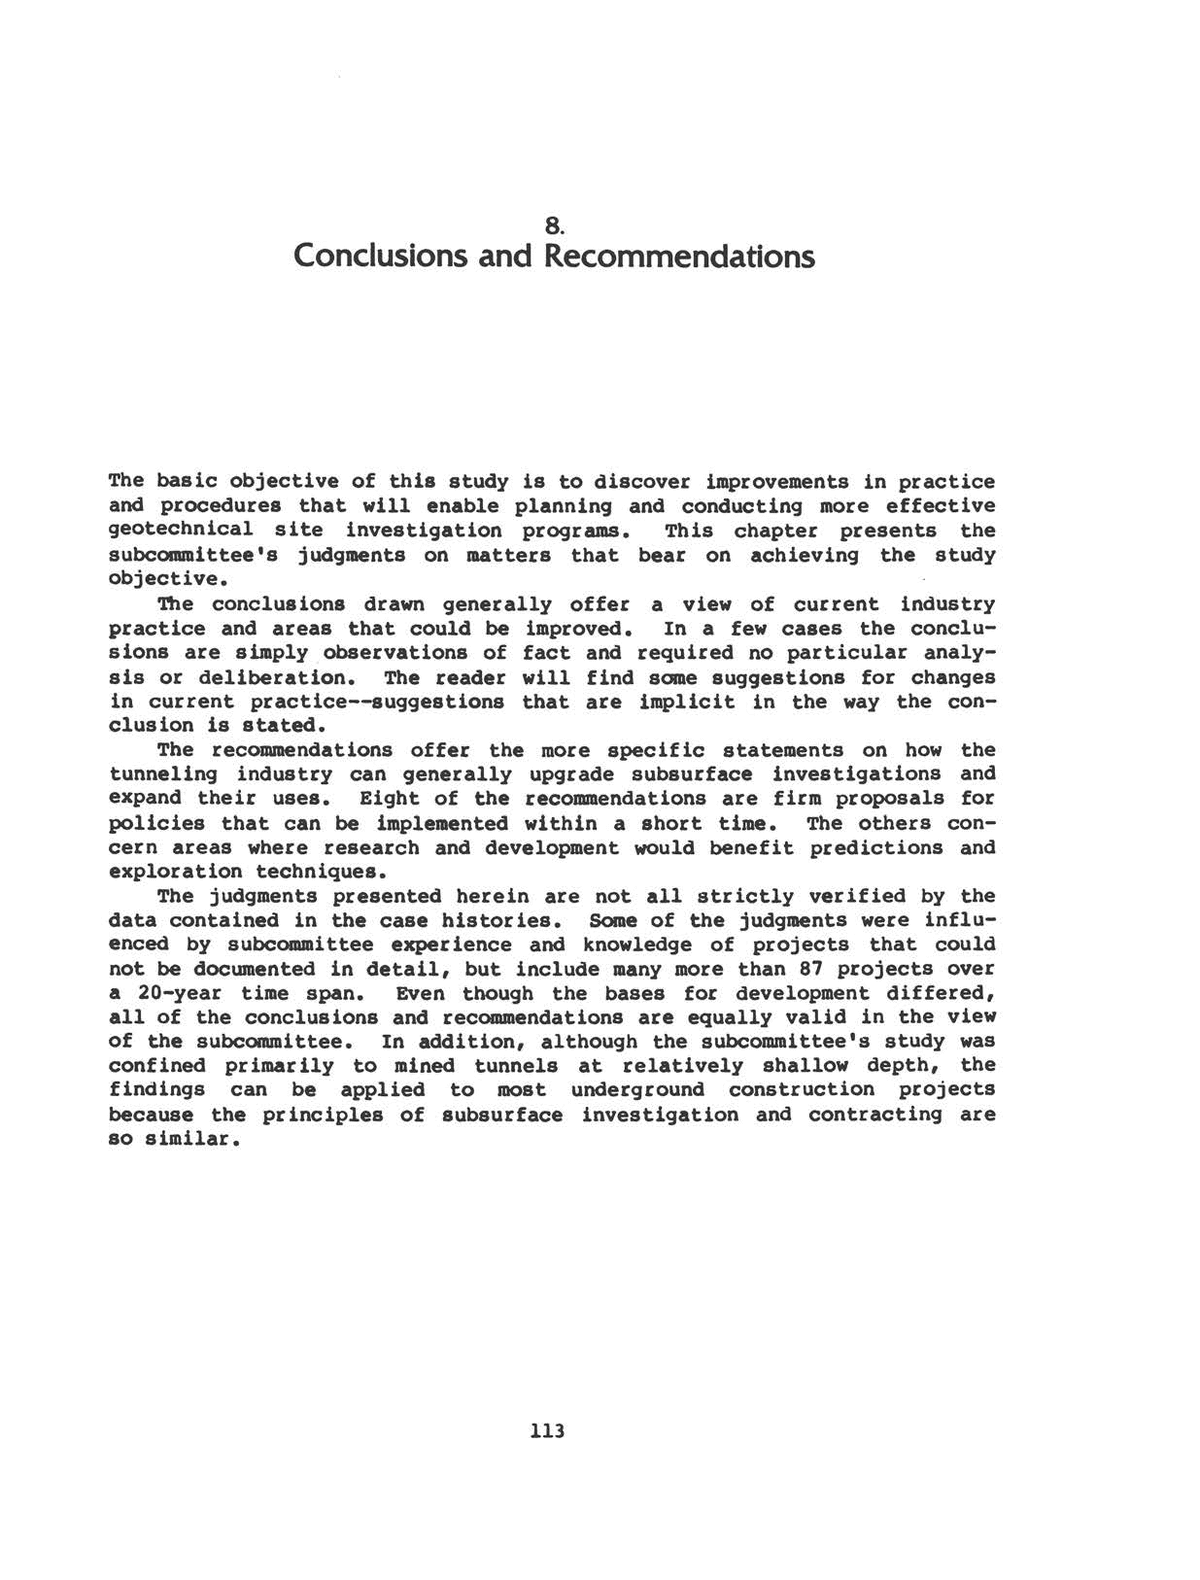 Conclusions And Recommendations Geotechnical Site Investigations For Underground Projects Volume 1 Overview Of Practice And Legal Issues Evaluation Of Cases Conclusions And Recommendations The National Academies Press